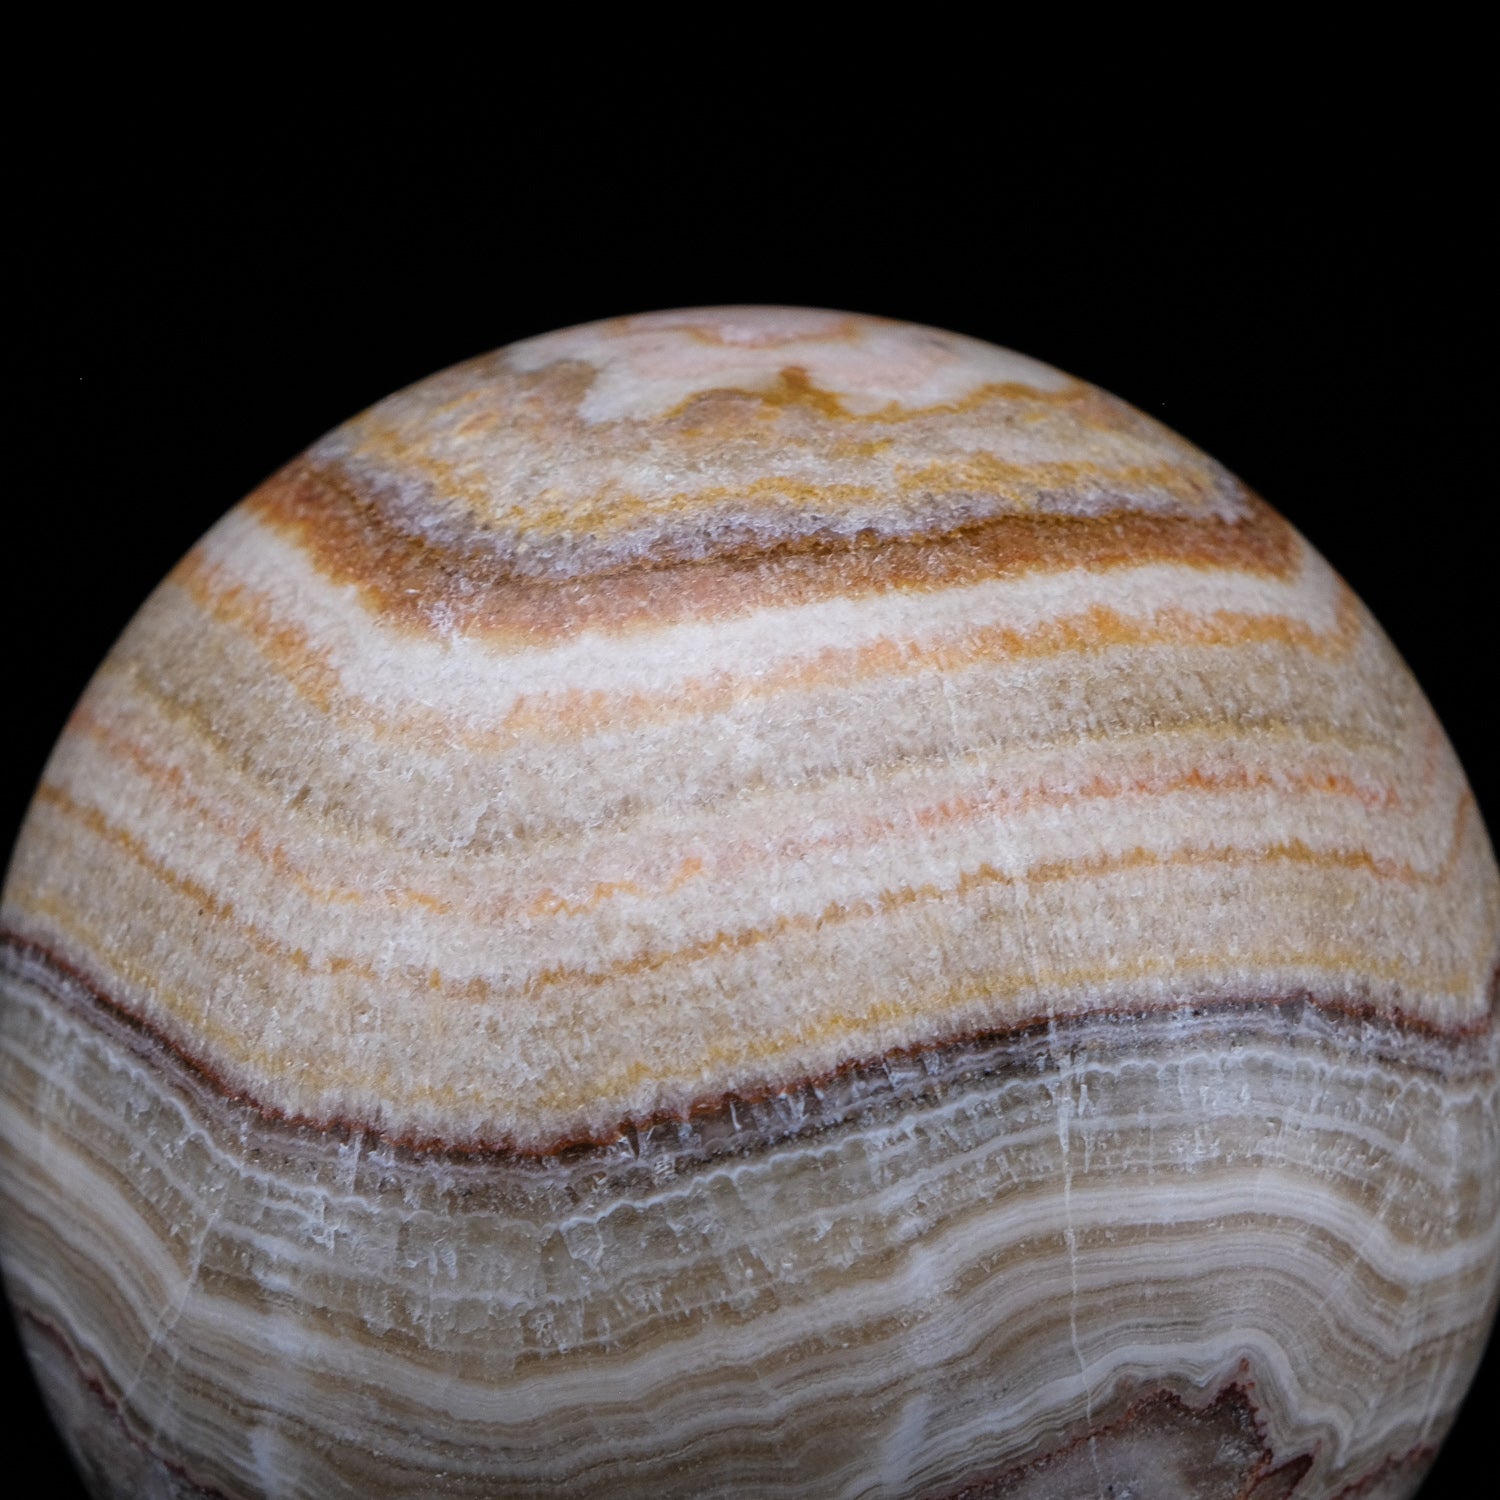 Genuine Polished Brown Banded Onyx Sphere from Mexico (3")